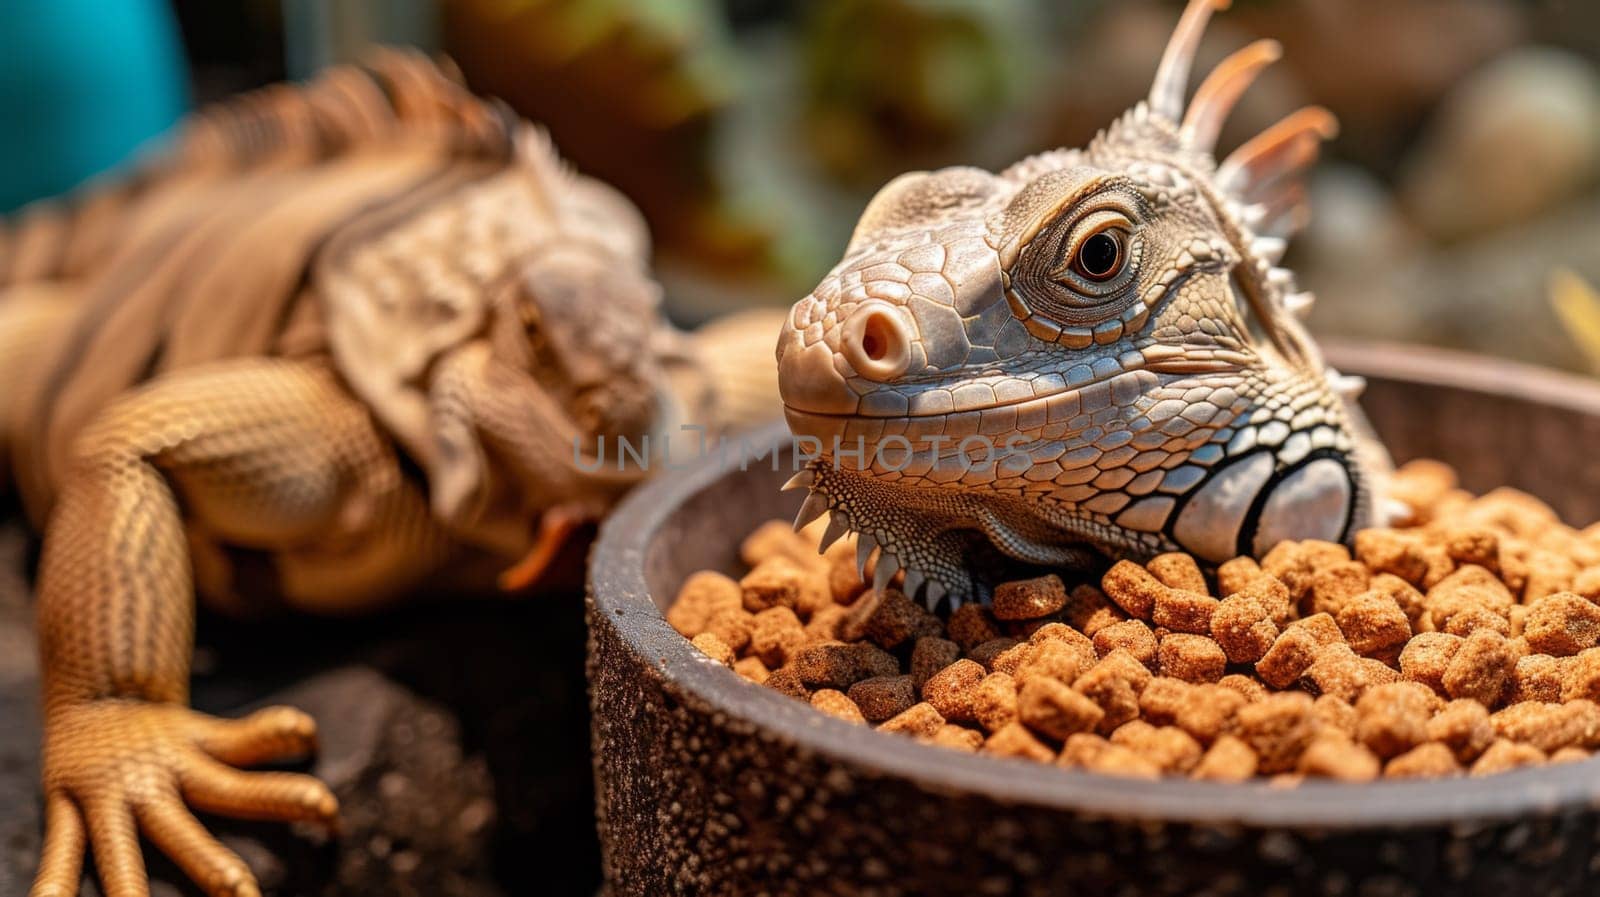 A lizard and a turtle sitting in the bowl of food, AI by starush